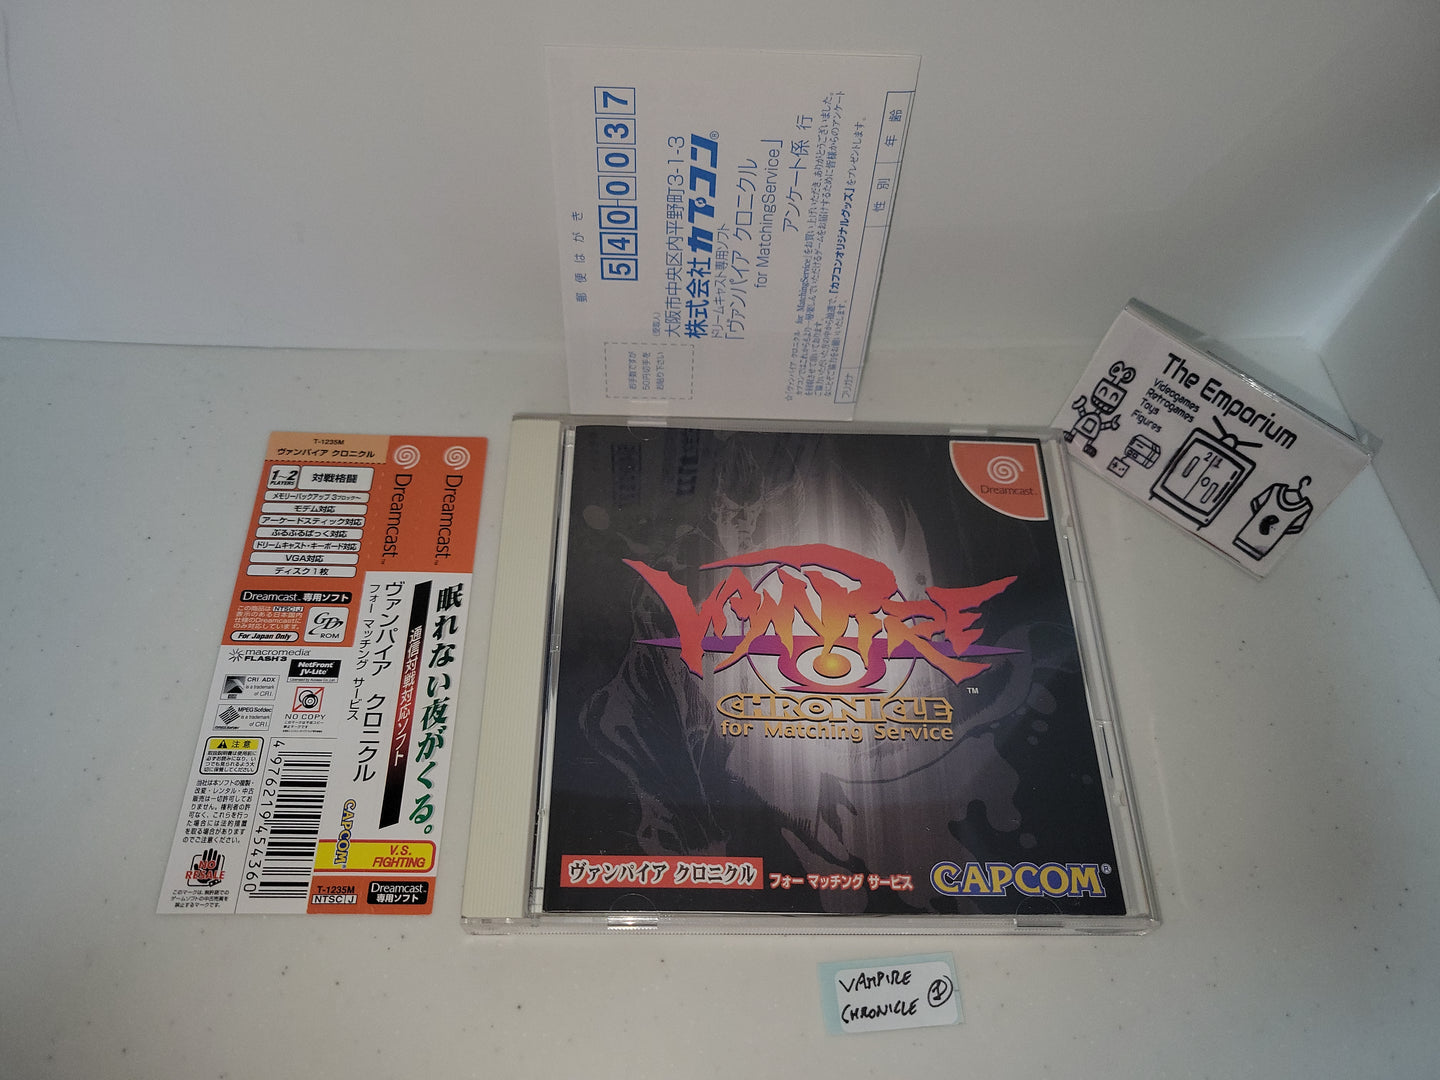 Vampire Chronicle for Matching Service
- Sega dc Dreamcast